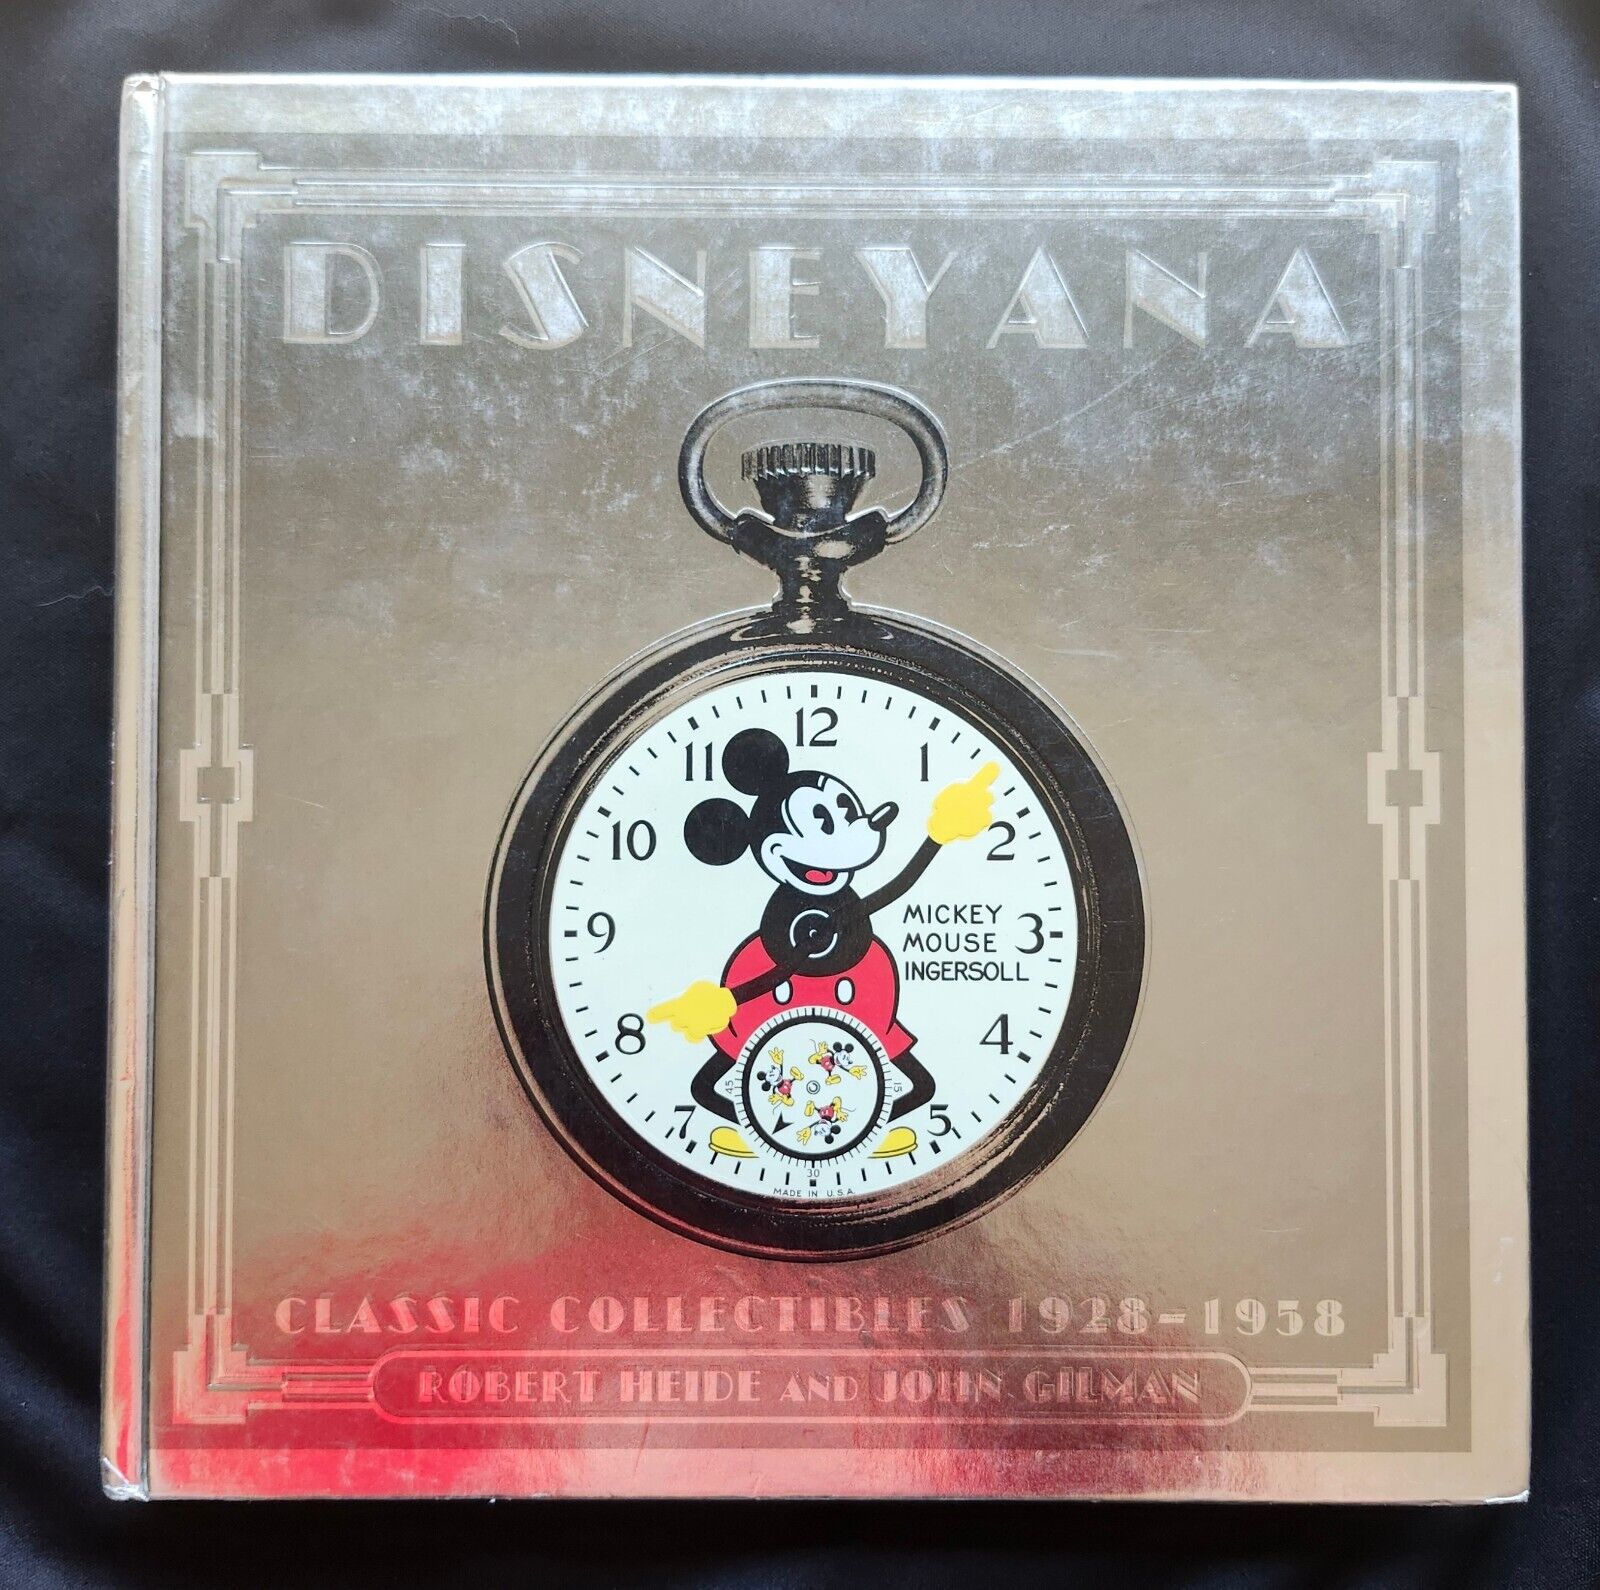 Disneyana Classic Collectibles 1928-1958 Hardcover, First Edition Copyright 1994